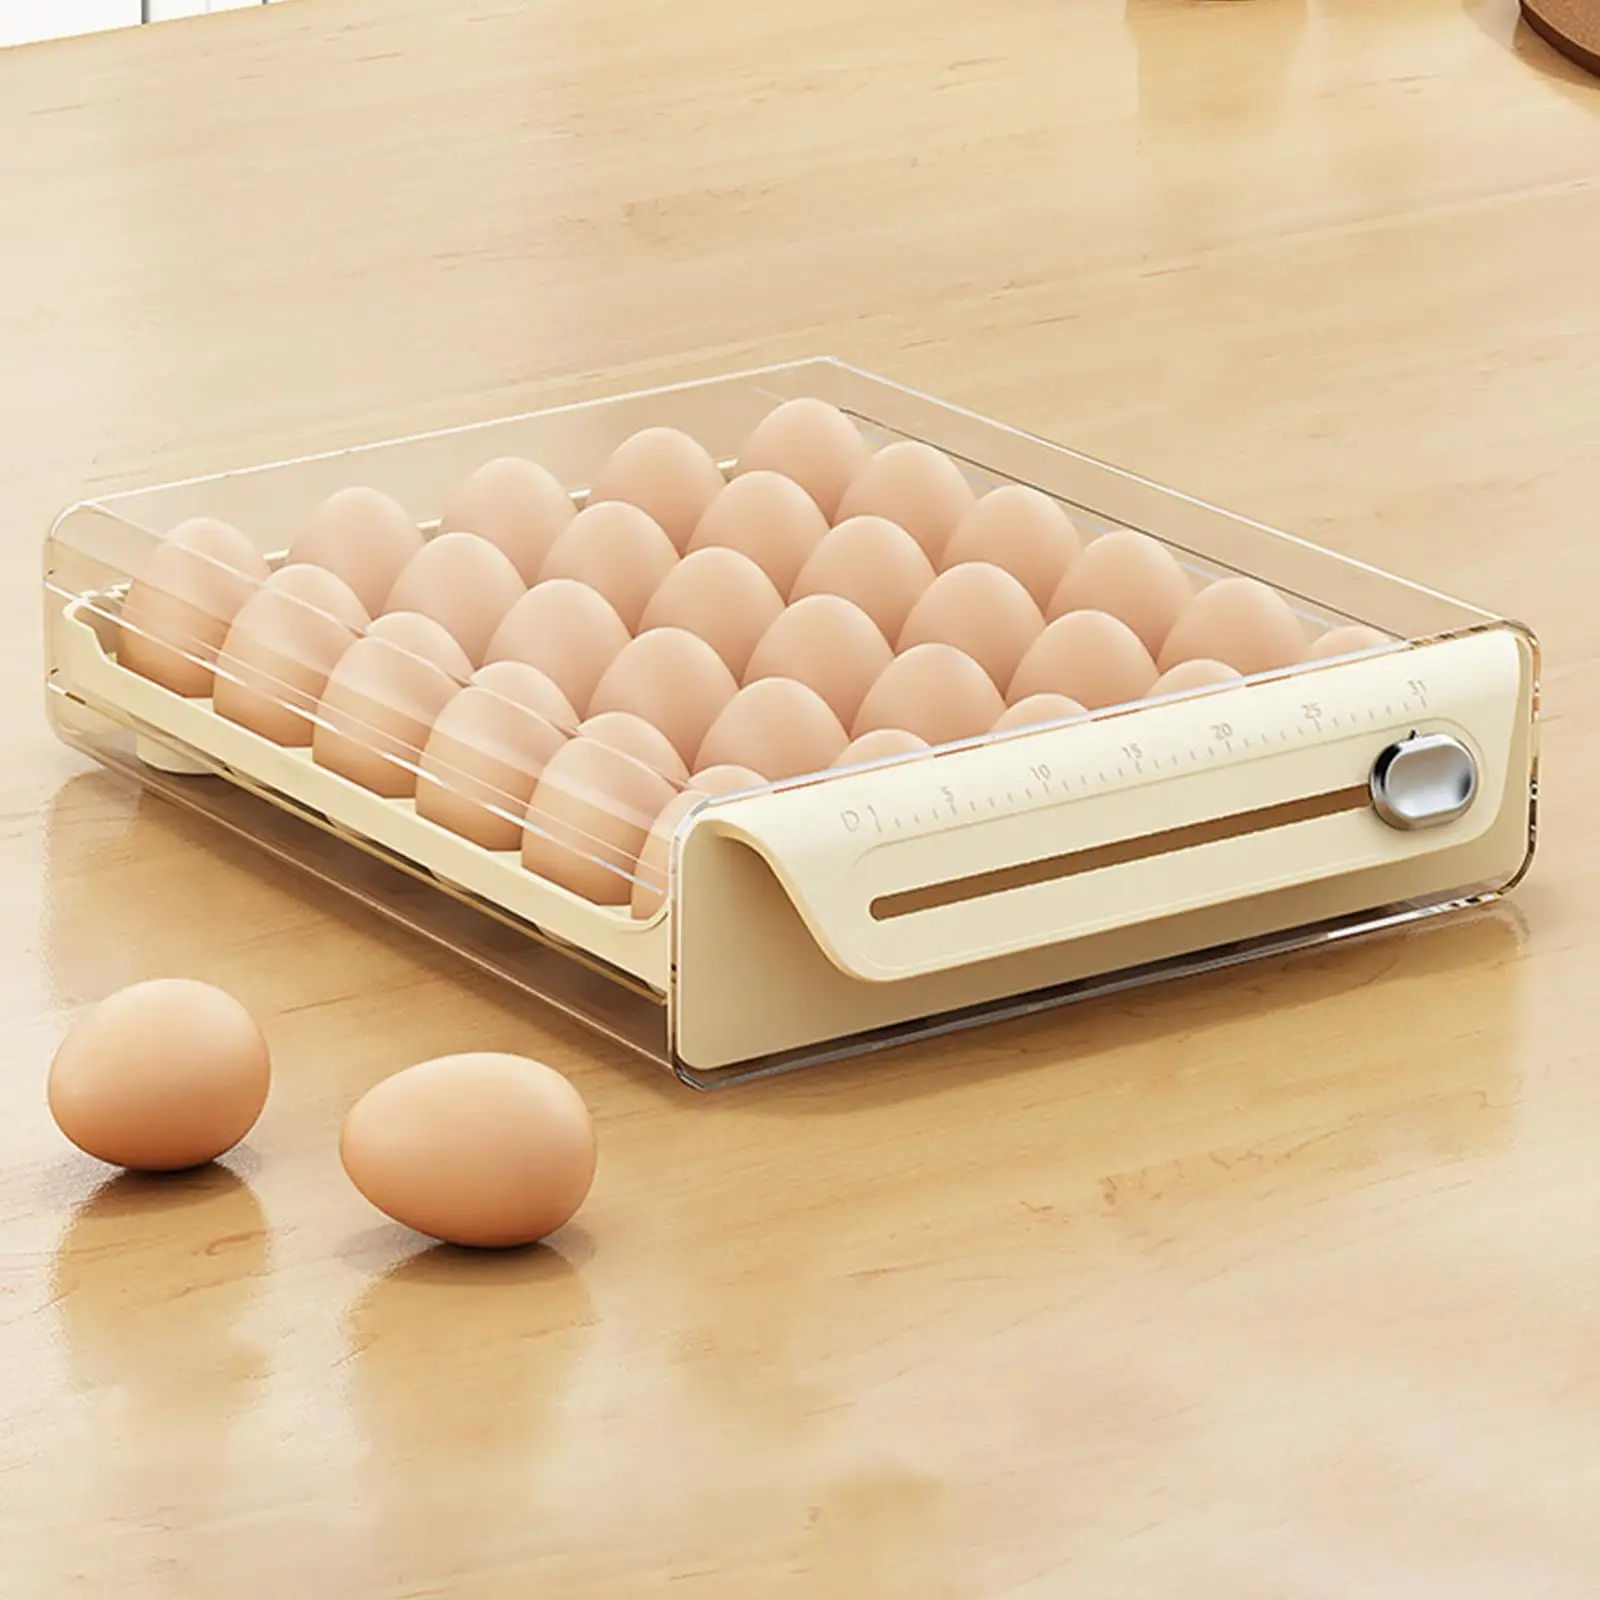 Egg Holder with Time Scale Reusable Eggd Tray with Drawer Egg Organizer for Refrigerator Dining Table Kitchen Freezer Pantry